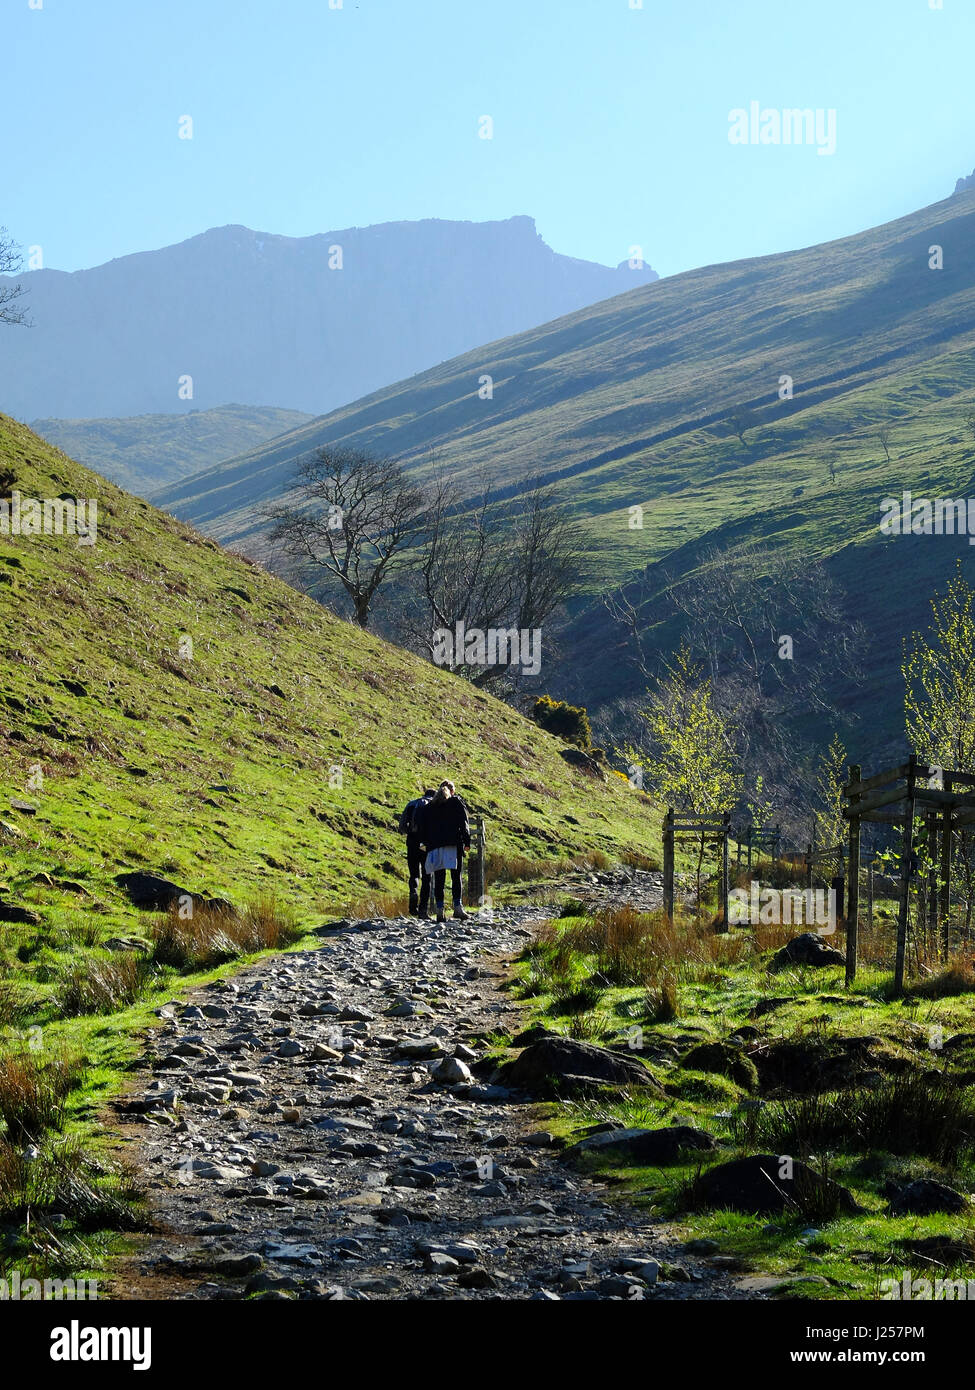 People hiking up to Scafell Pike in the Lade District, Cumbria, England's highest mountain. Stock Photo